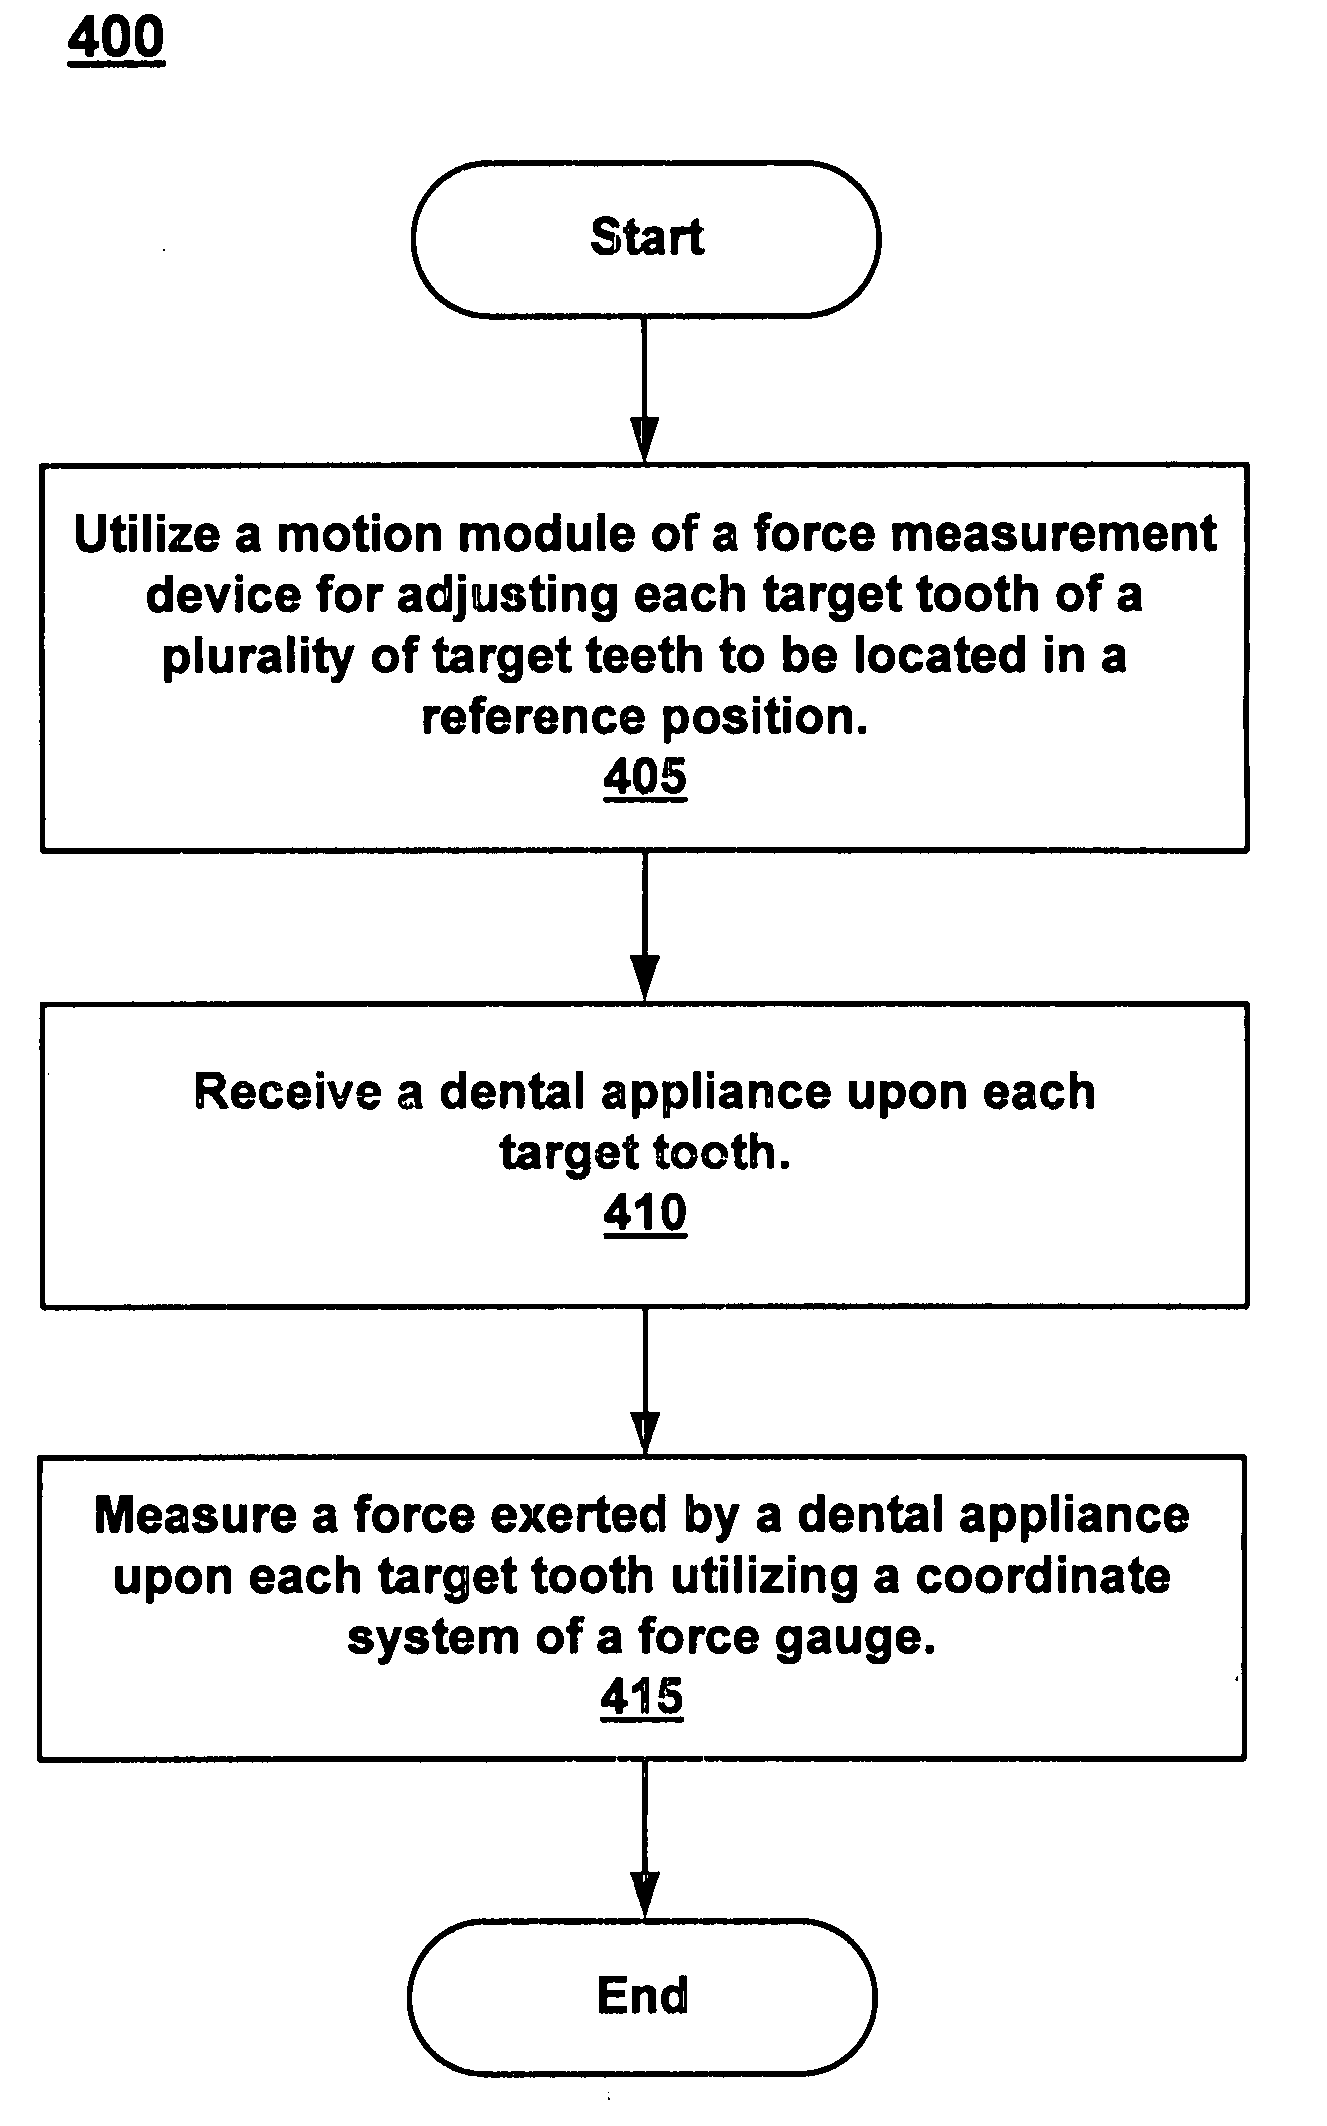 Concurrently measuring a force exerted upon each of a plurality of teeth